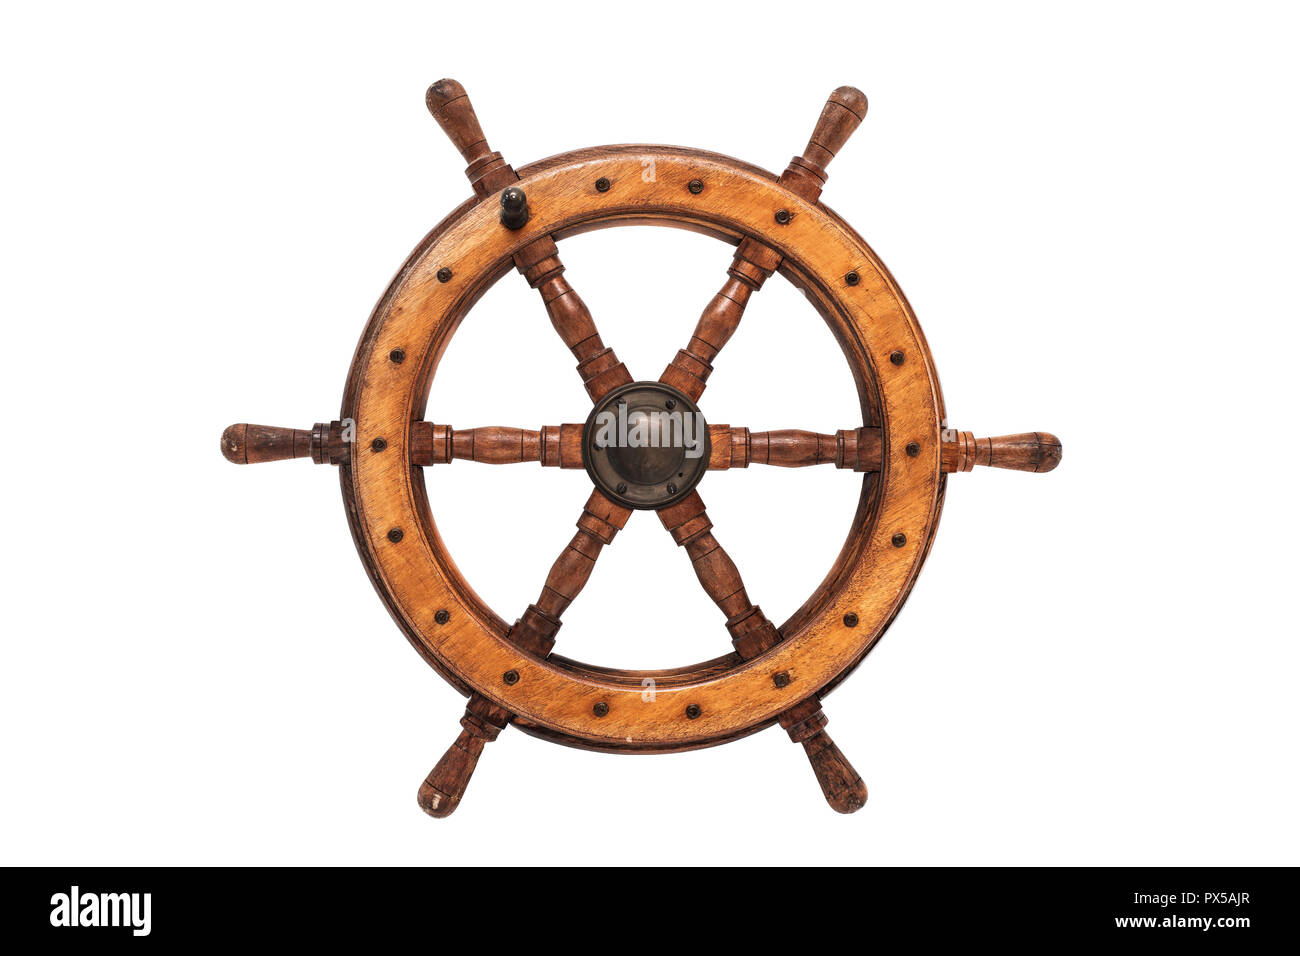 Isolated Vintage Wooden And Brass Ship's Steering Wheel With White Background Stock Photo